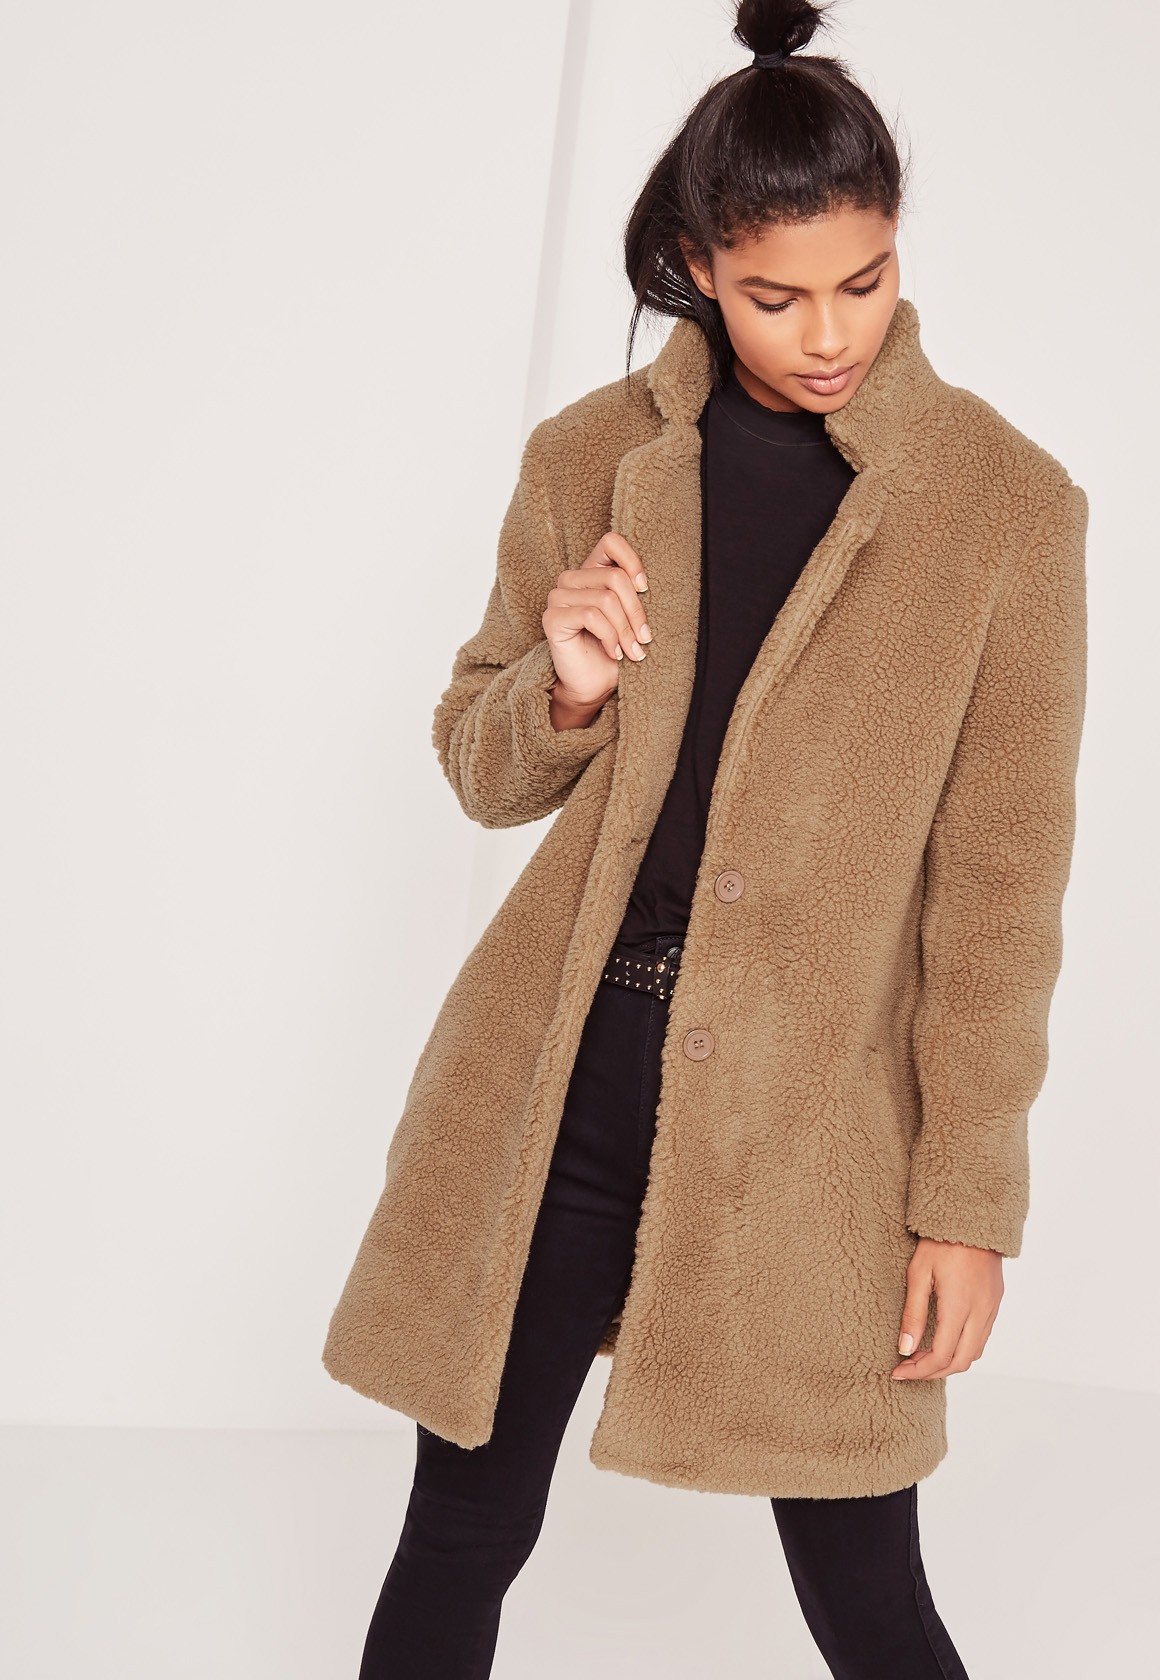 Few common facts about shearling coats